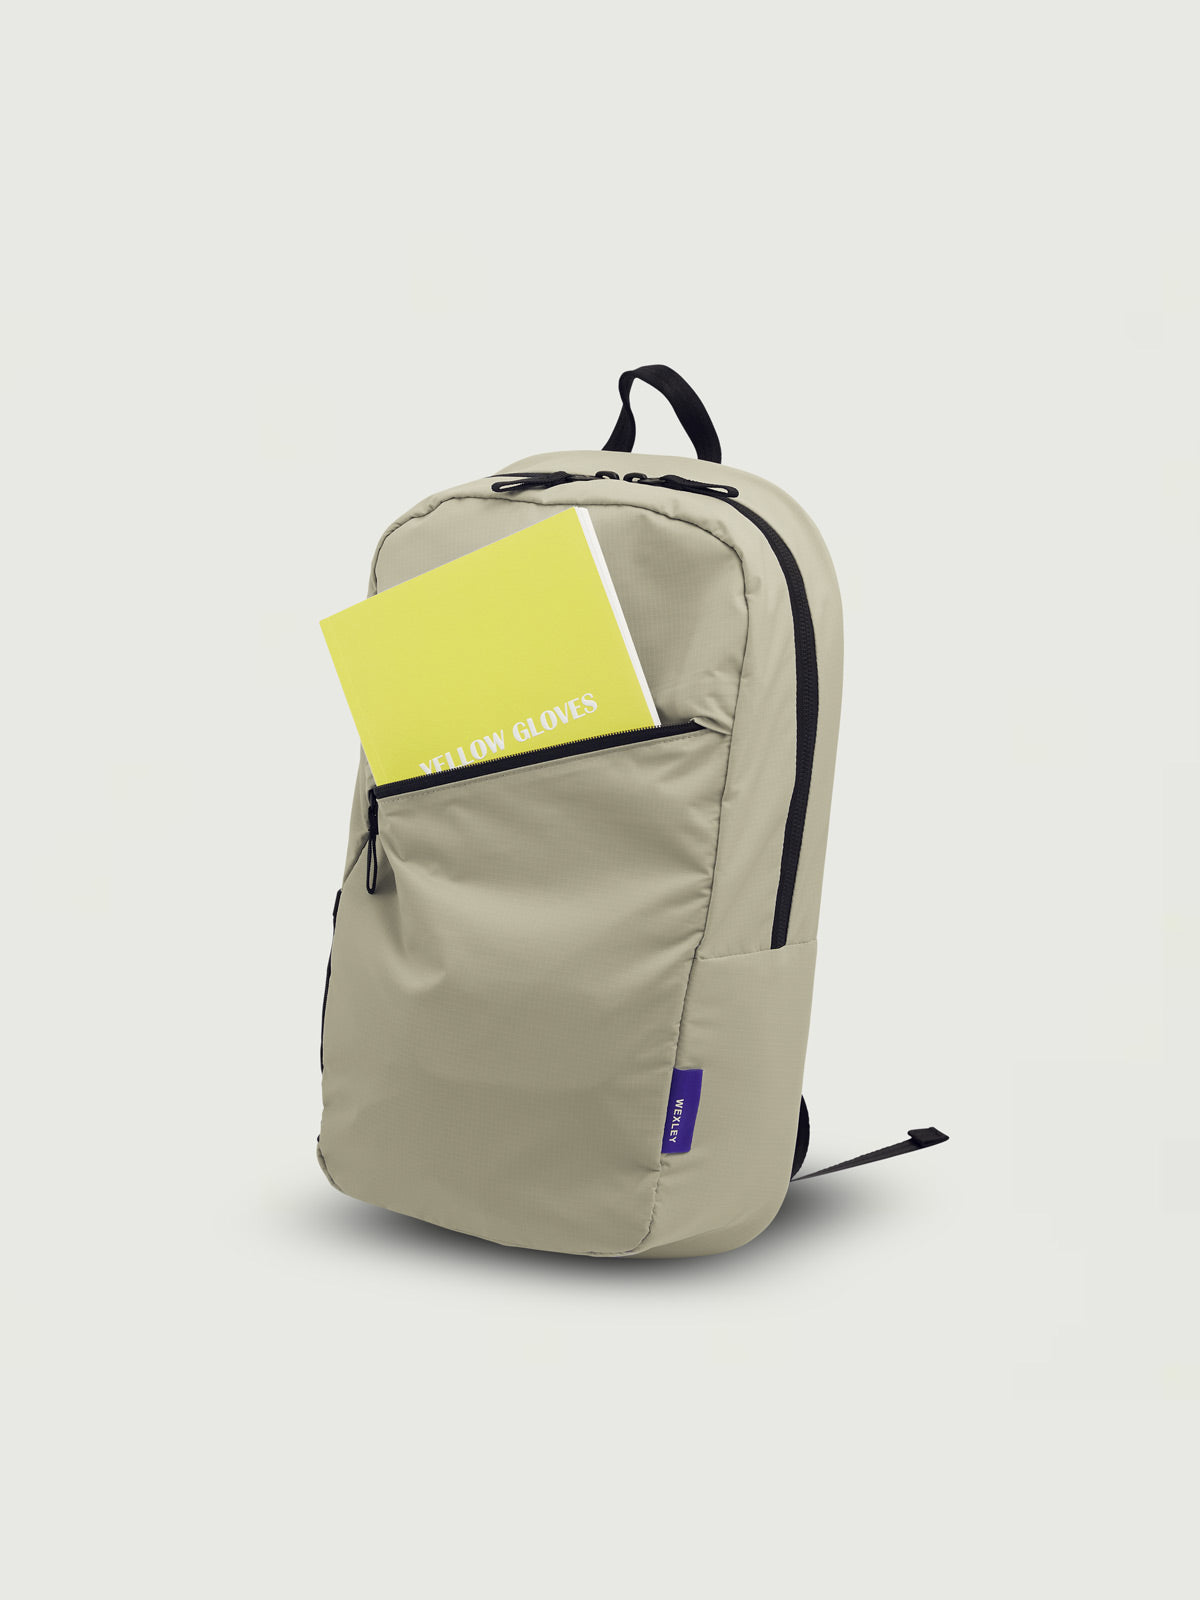 STAHL DAYPACK LIGHTWEIGHT RECYCLED RIPSTOP